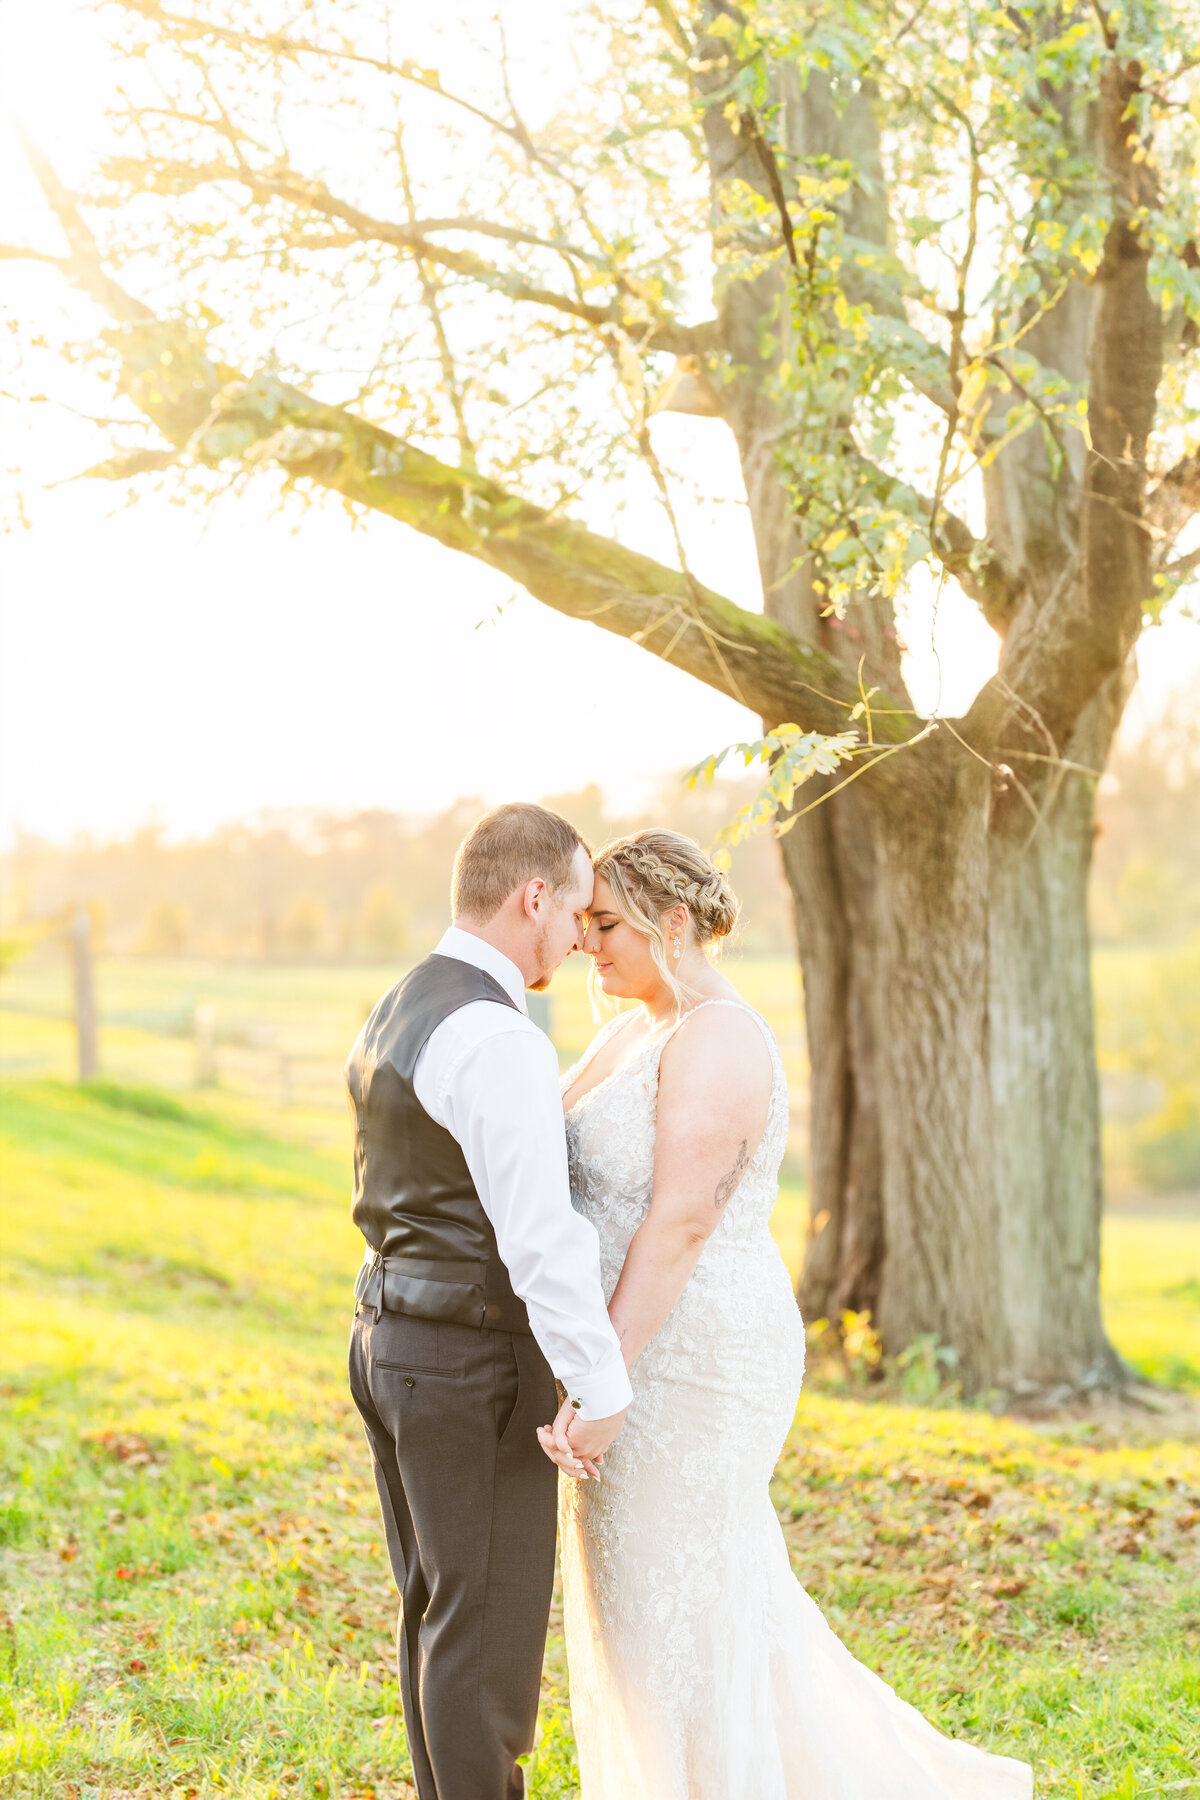 Newlyweds touch foreheads and hold hands while standing under an old tree in a pasture at sunset